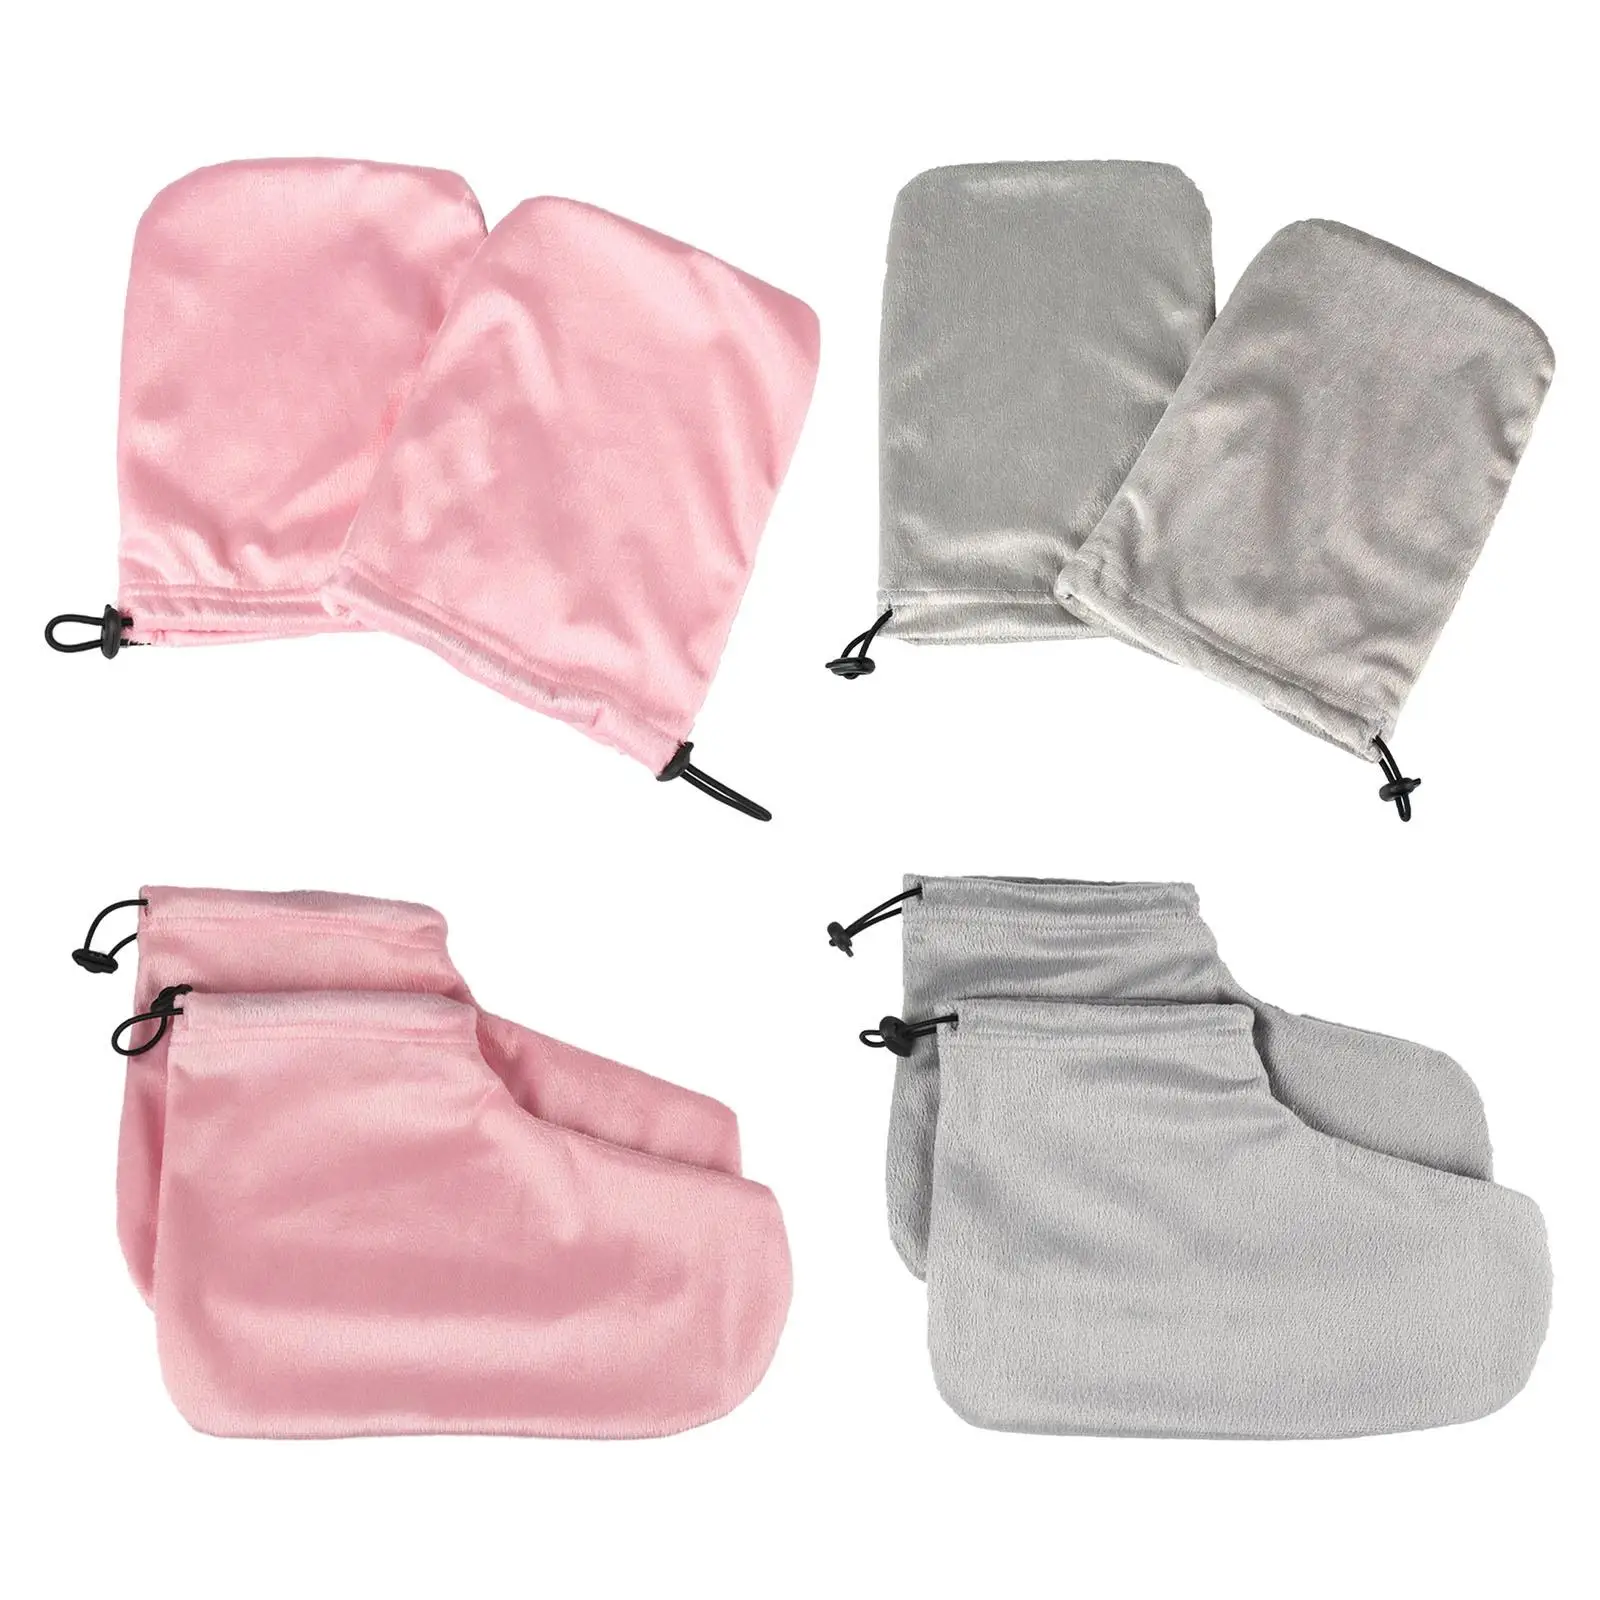  Wax Mitts for Hand  Wax Mitten Moisturizing Cover Bags